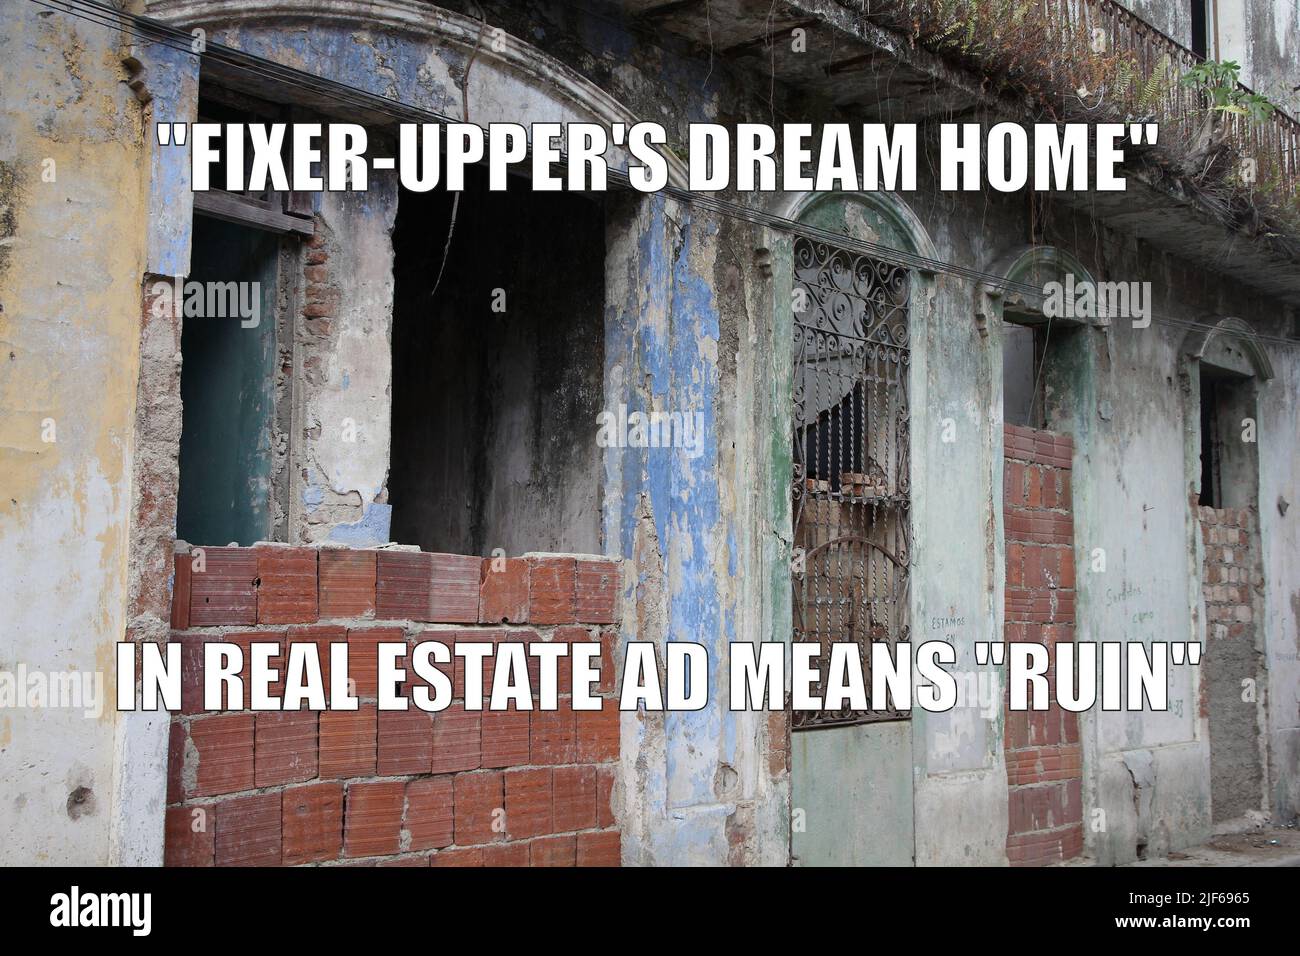 Real estate agent lies about property condition funny meme for social media sharing. Real estate ad language euphemisms. Stock Photo